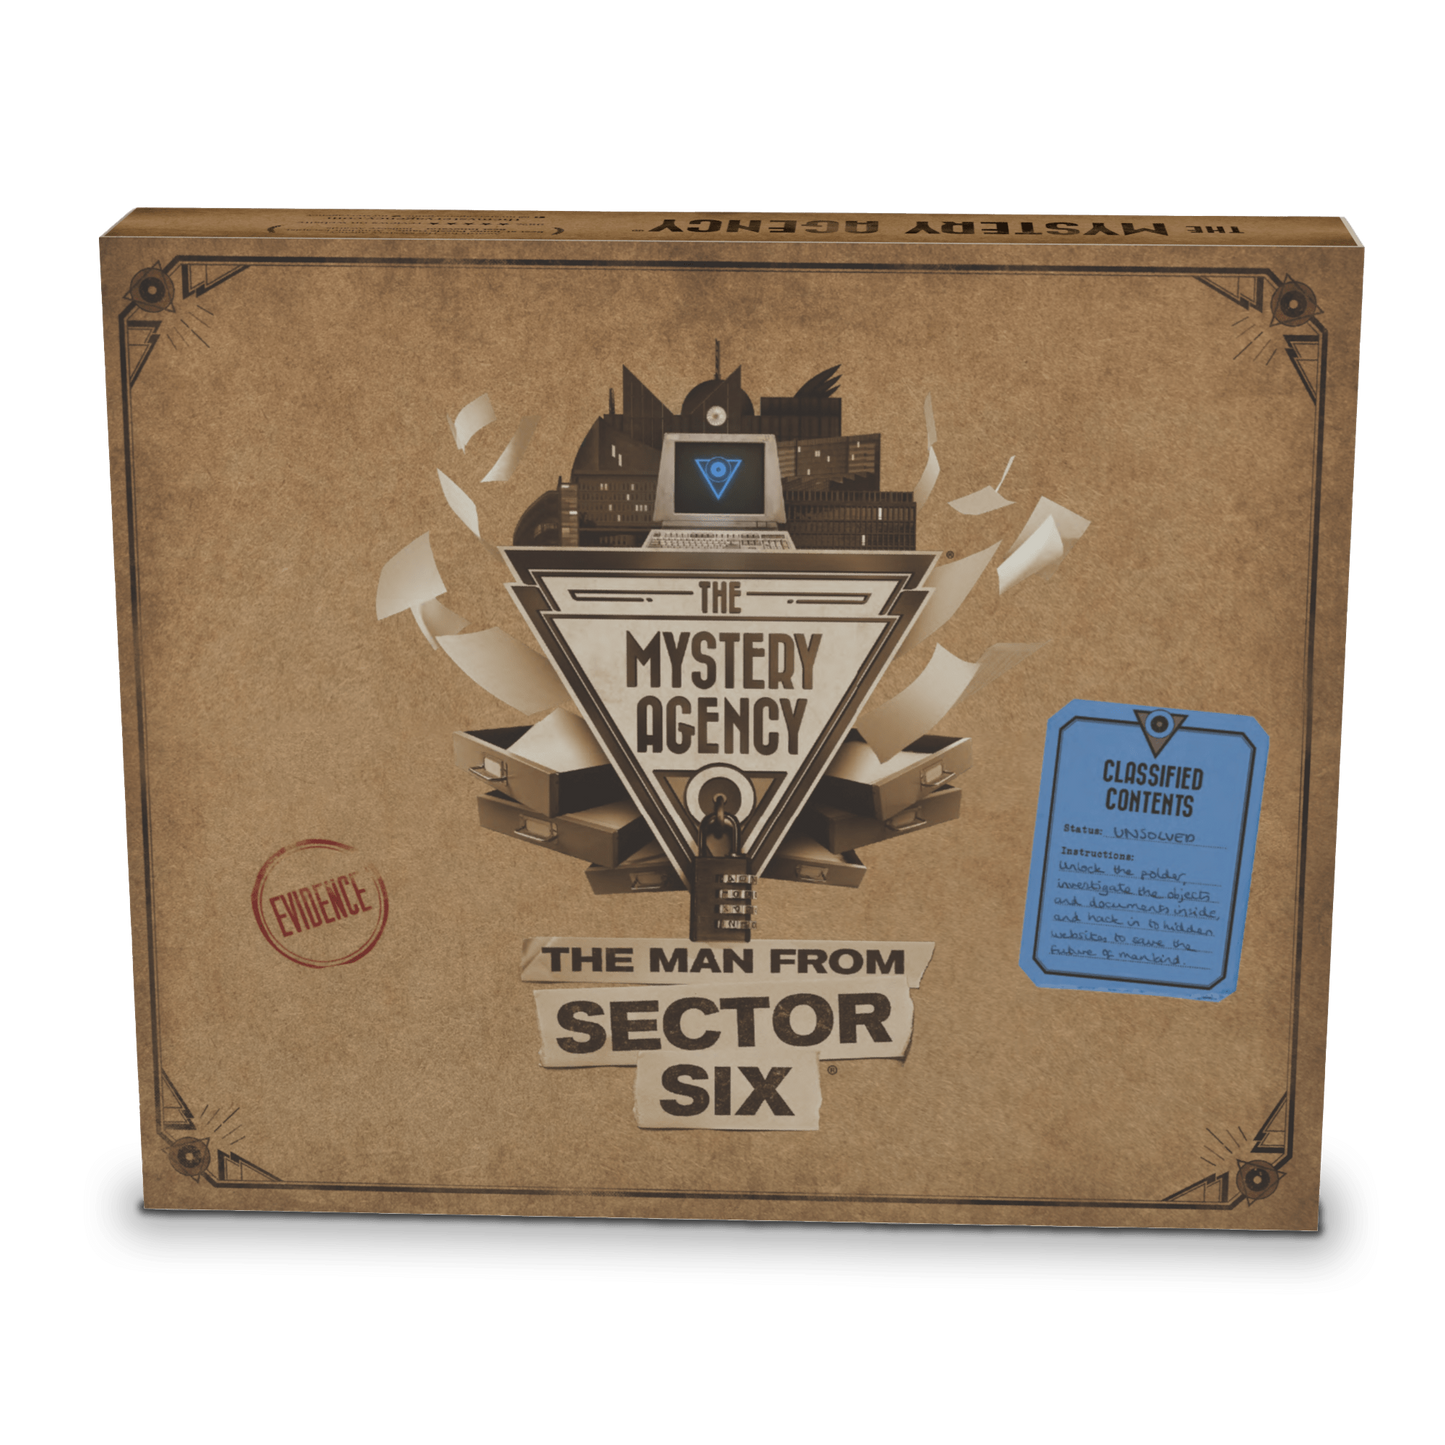 MYSTERY AGENCY: THE MAN FROM SECTOR SIX